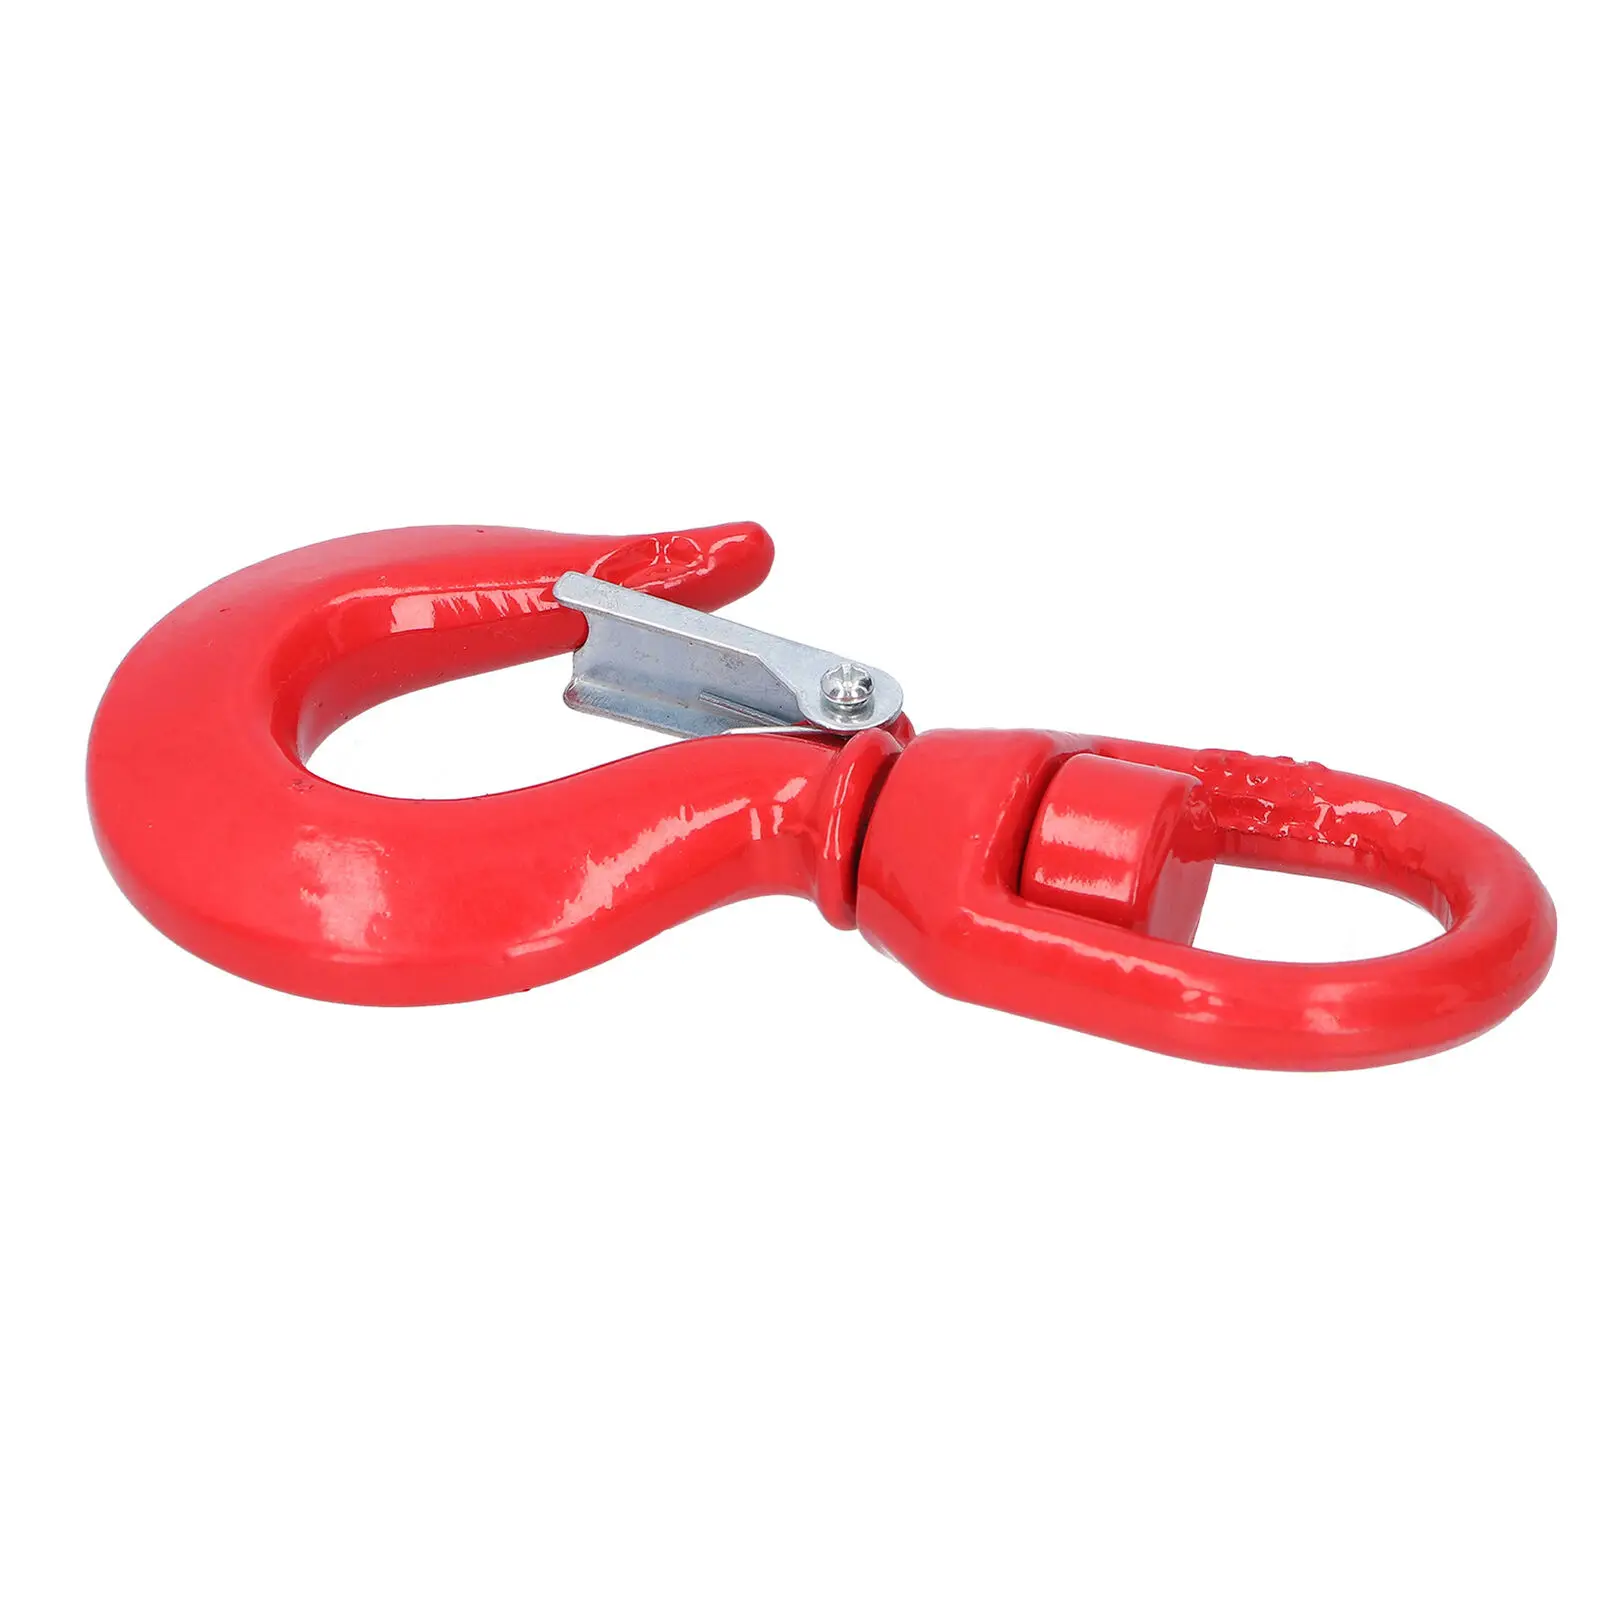 Crane Hook Grab Safety Rotation Container Industrial Supplies Lifting